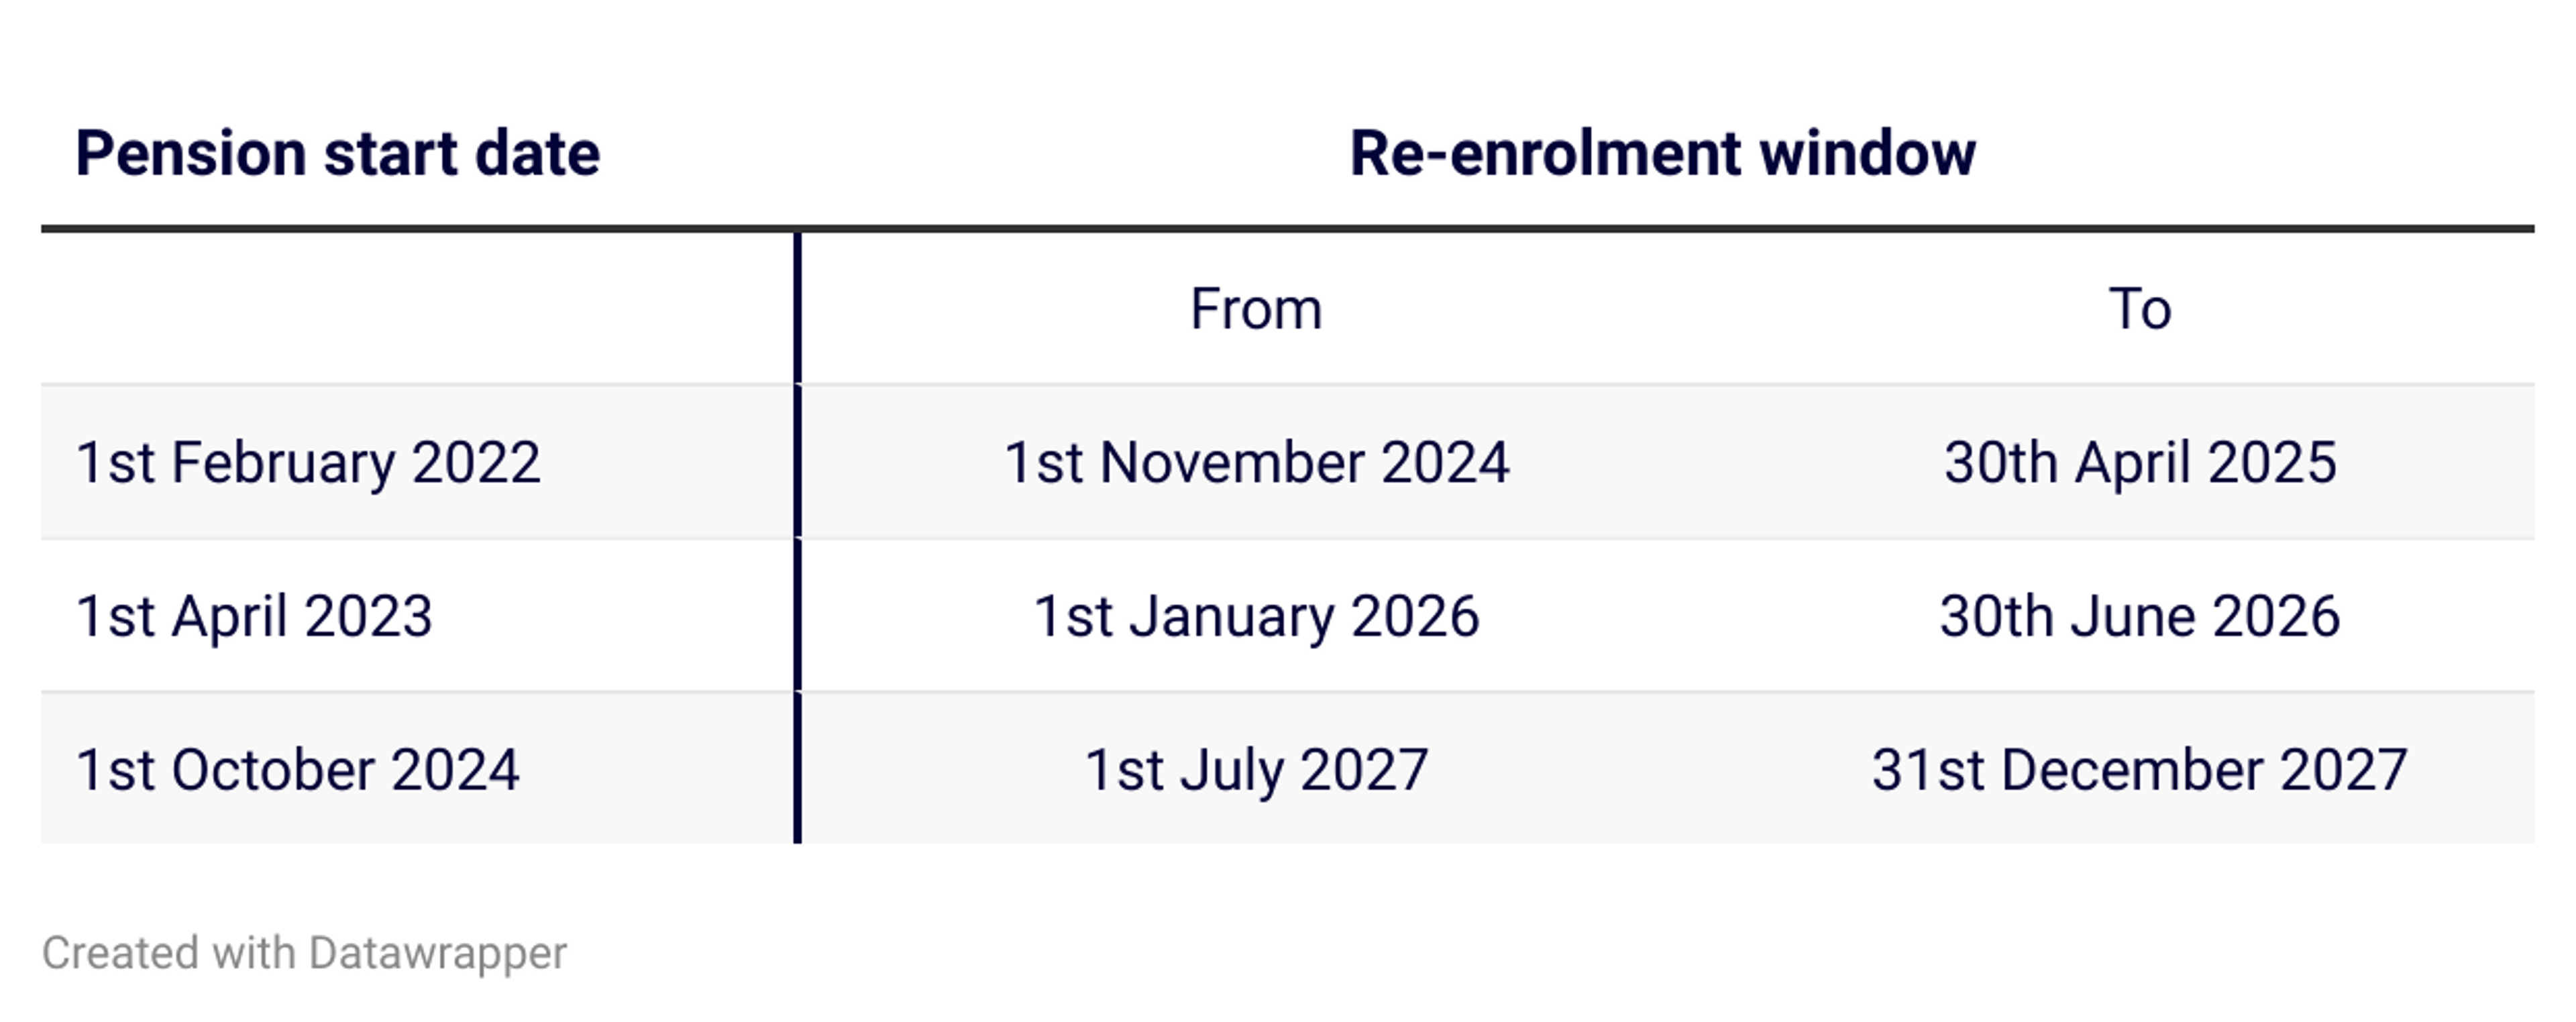 Table showing pension re-enrolment windows from 2022 to 2024